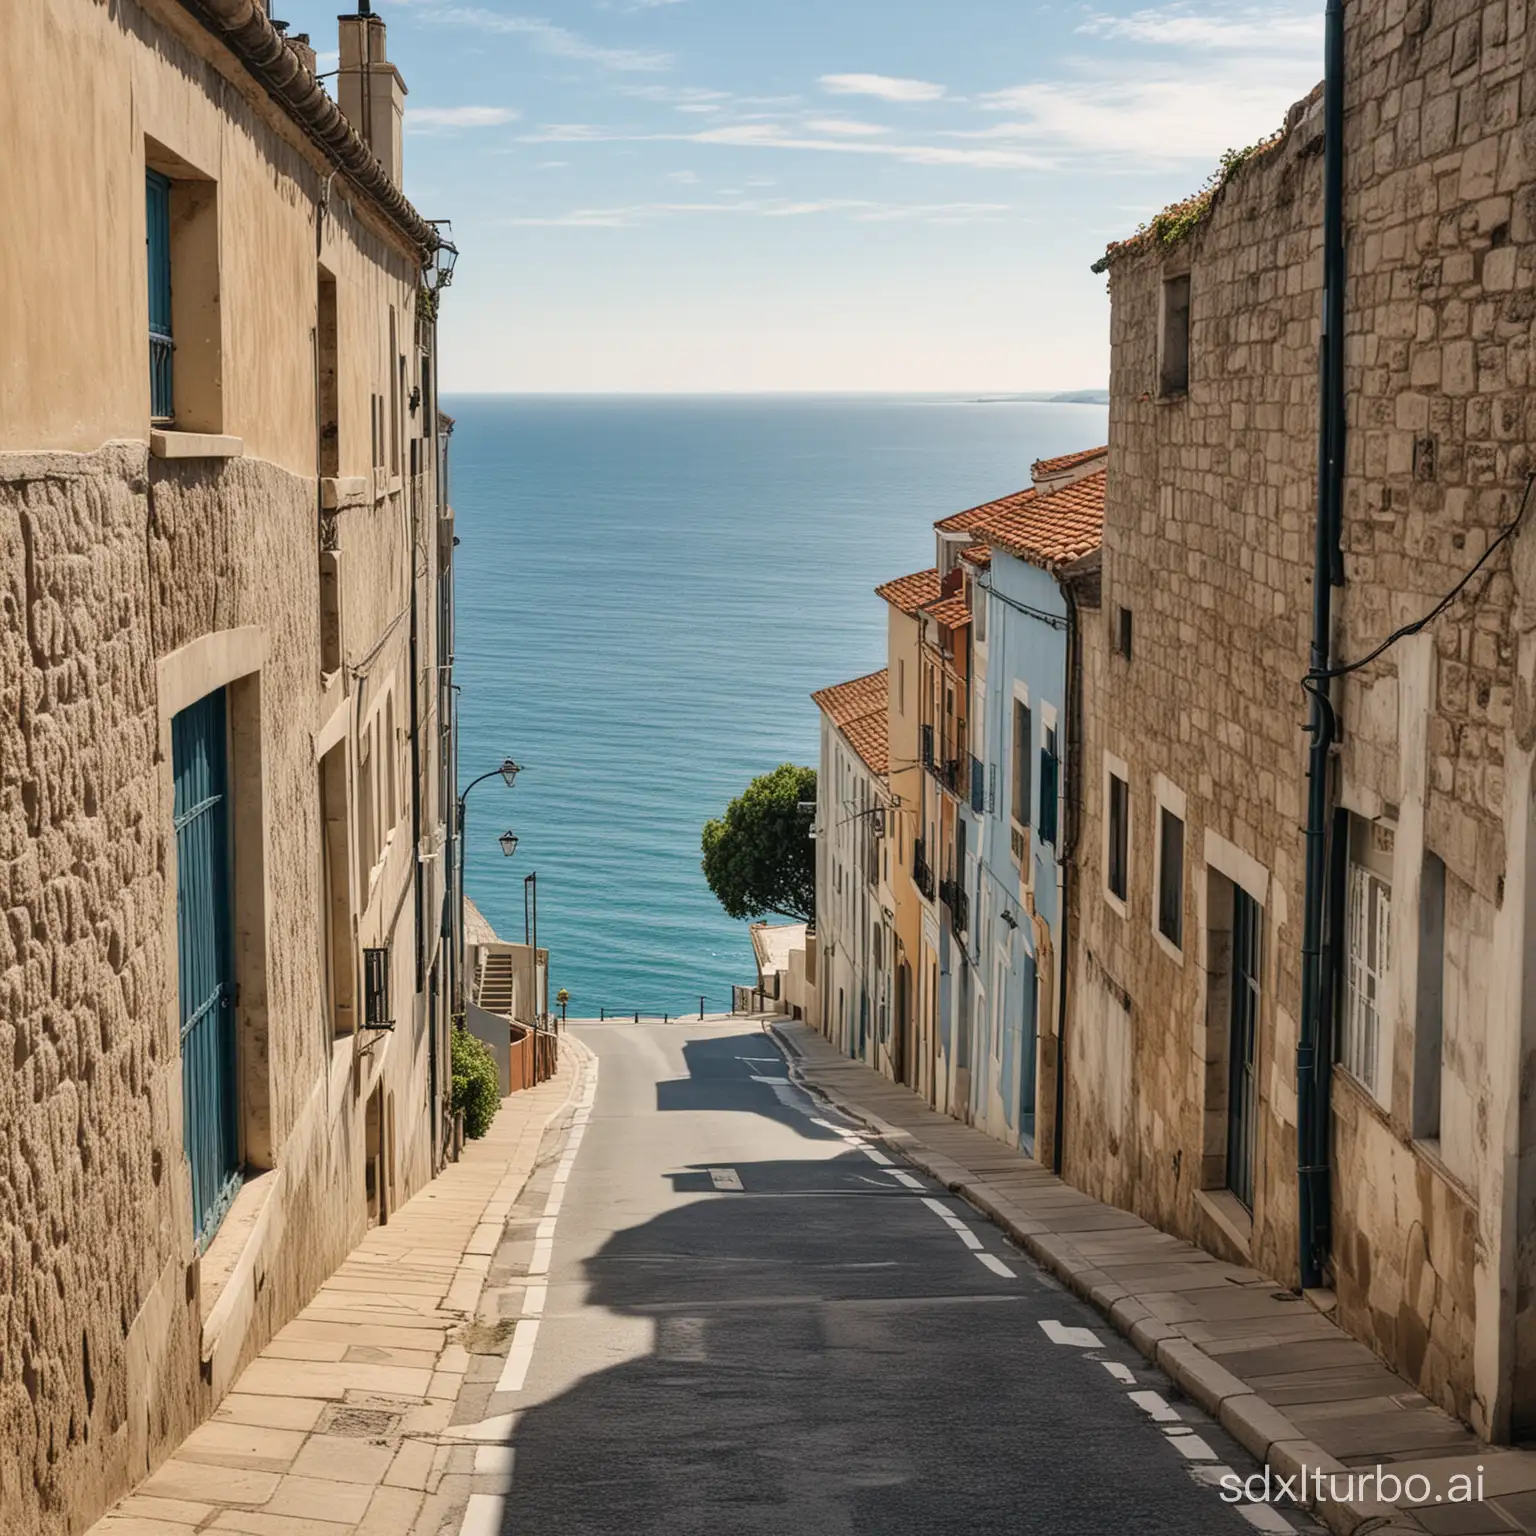 A street with a view of the sea
prompt
